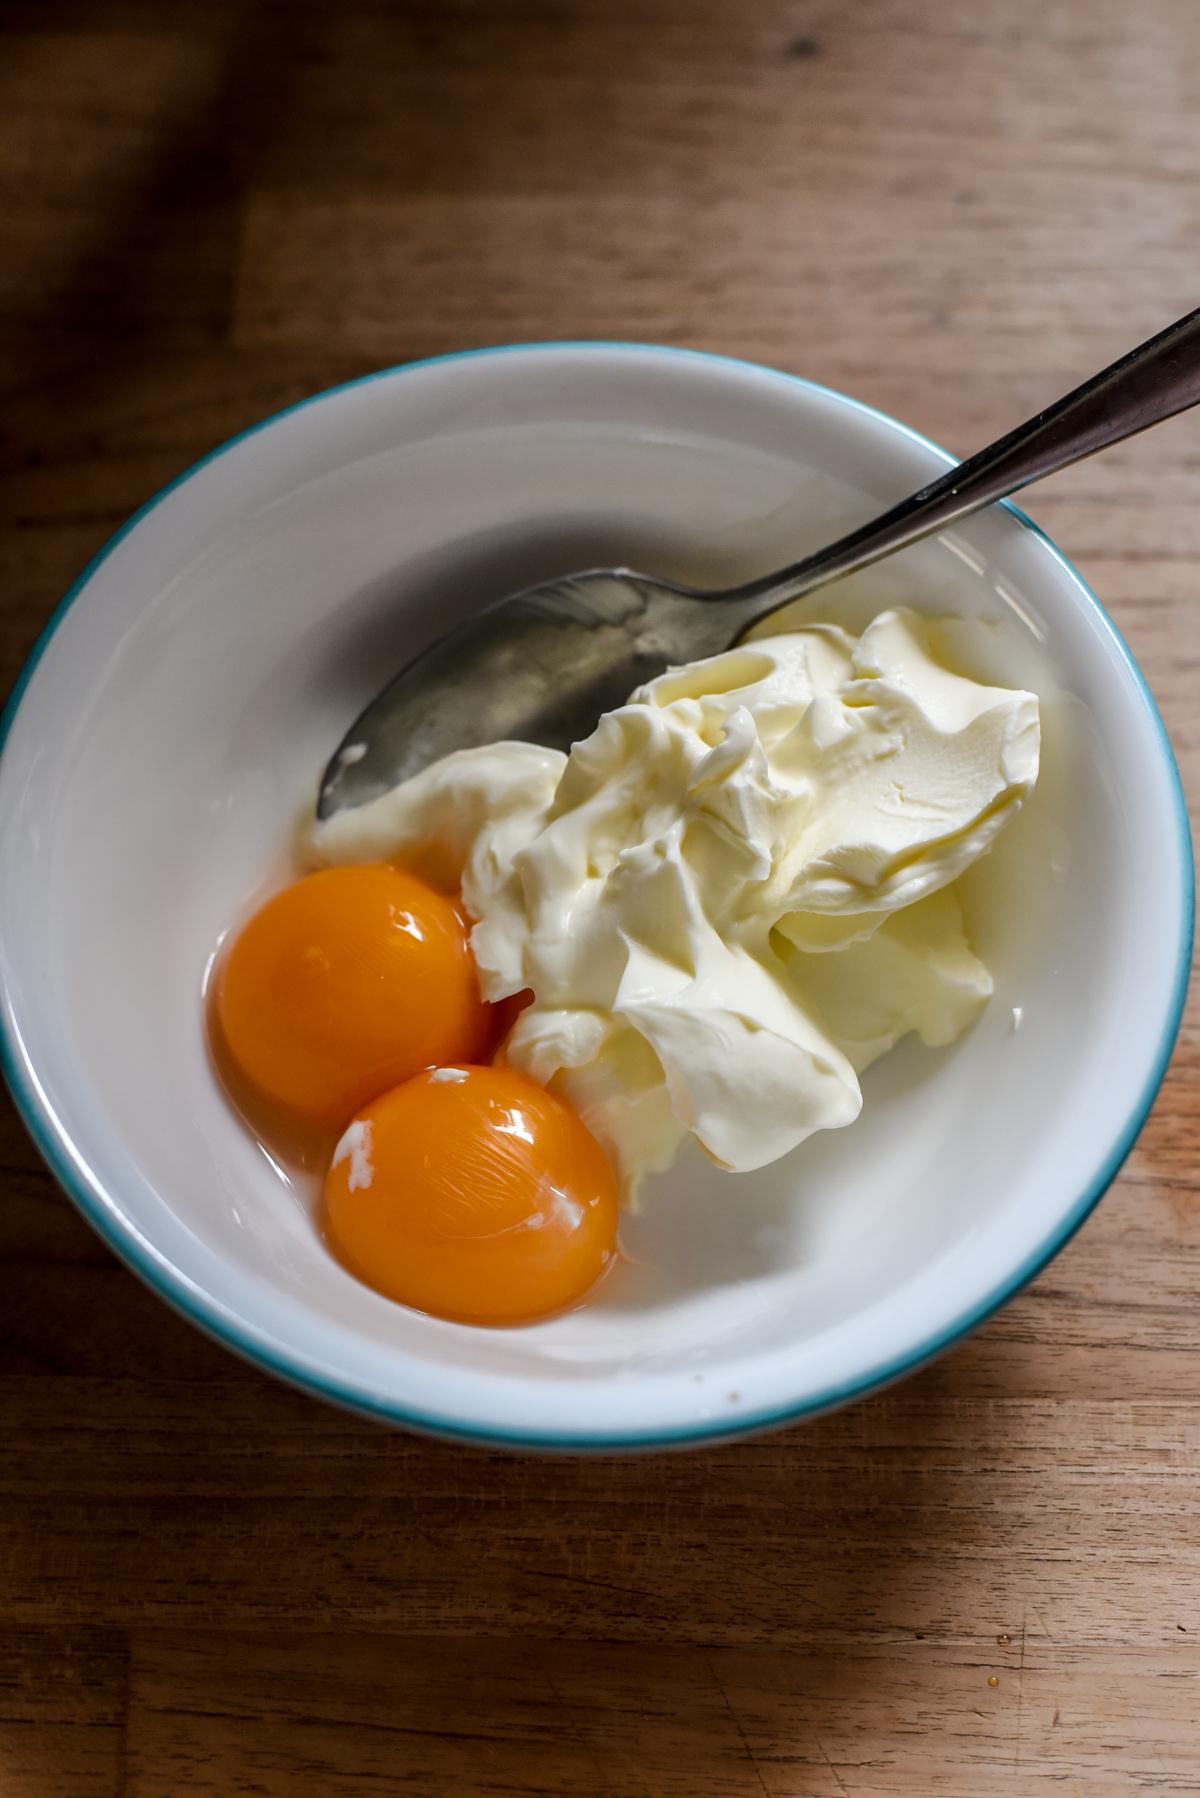 Whisk together creme fraiche and egg yolks for the migaine. (Audrey Le Goff)